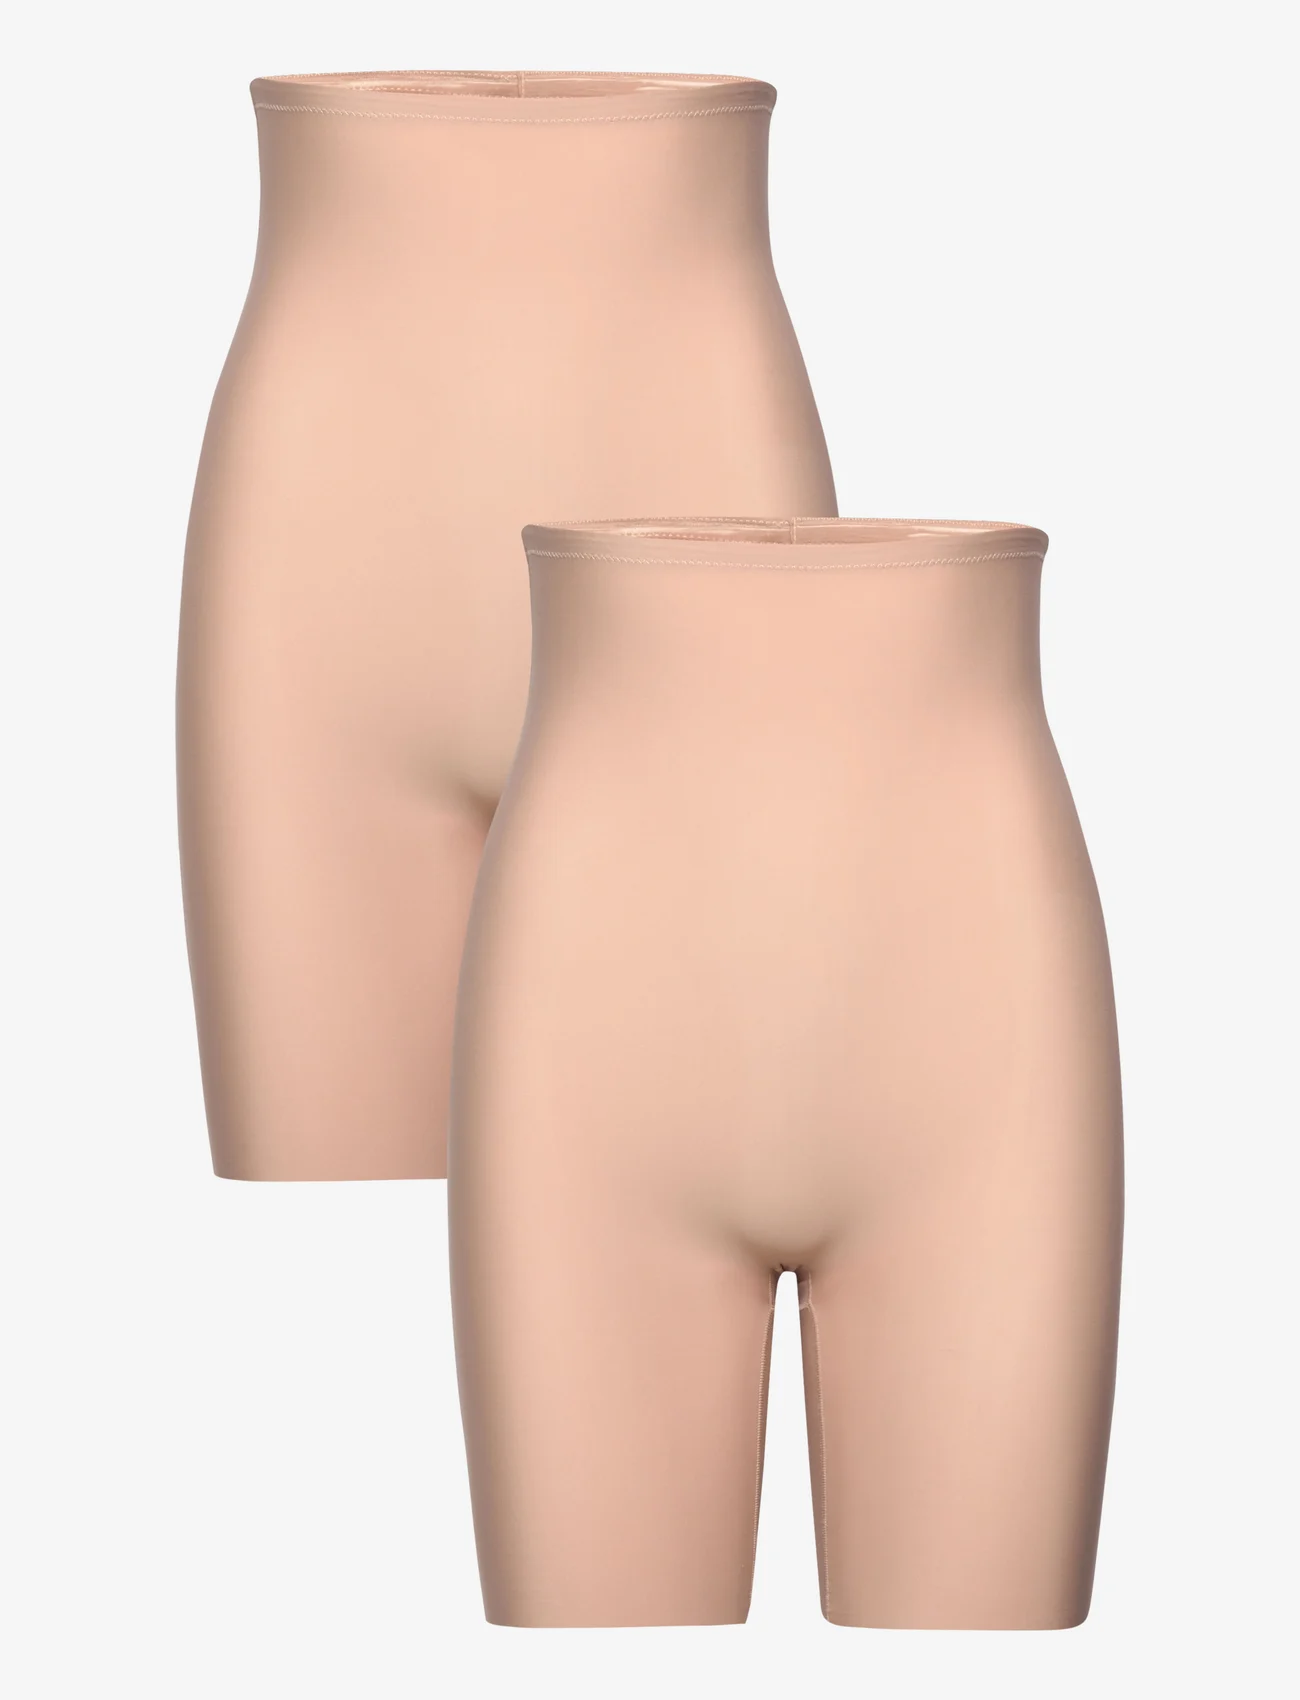 Decoy - DECOY Shapewear shorts 2-pack - lowest prices - nude - 0